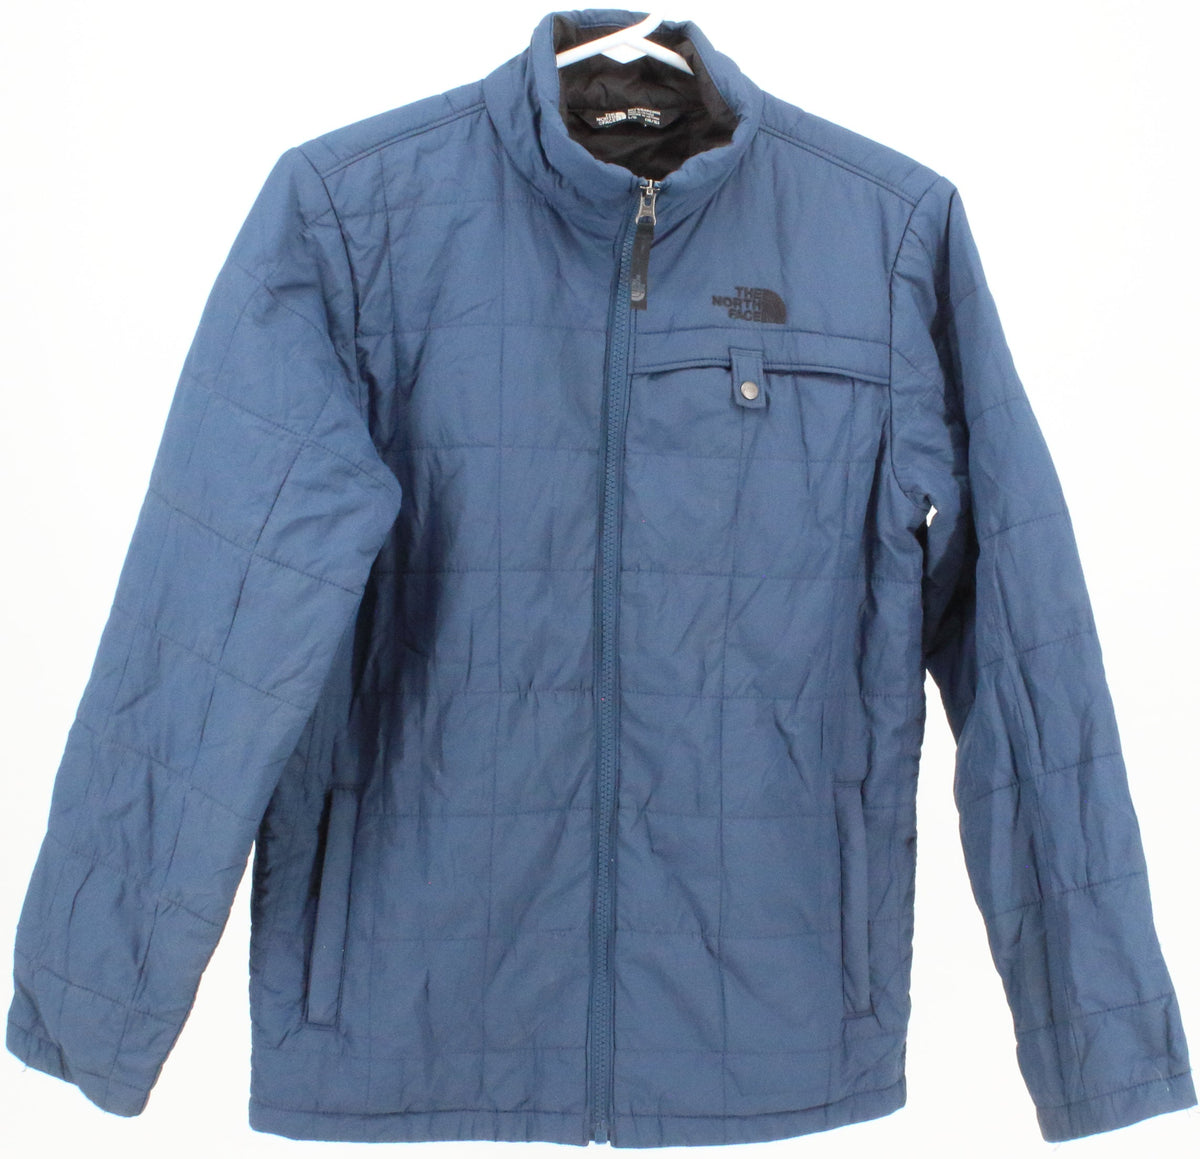 The North Face Boy's Blue Insulated Jacket